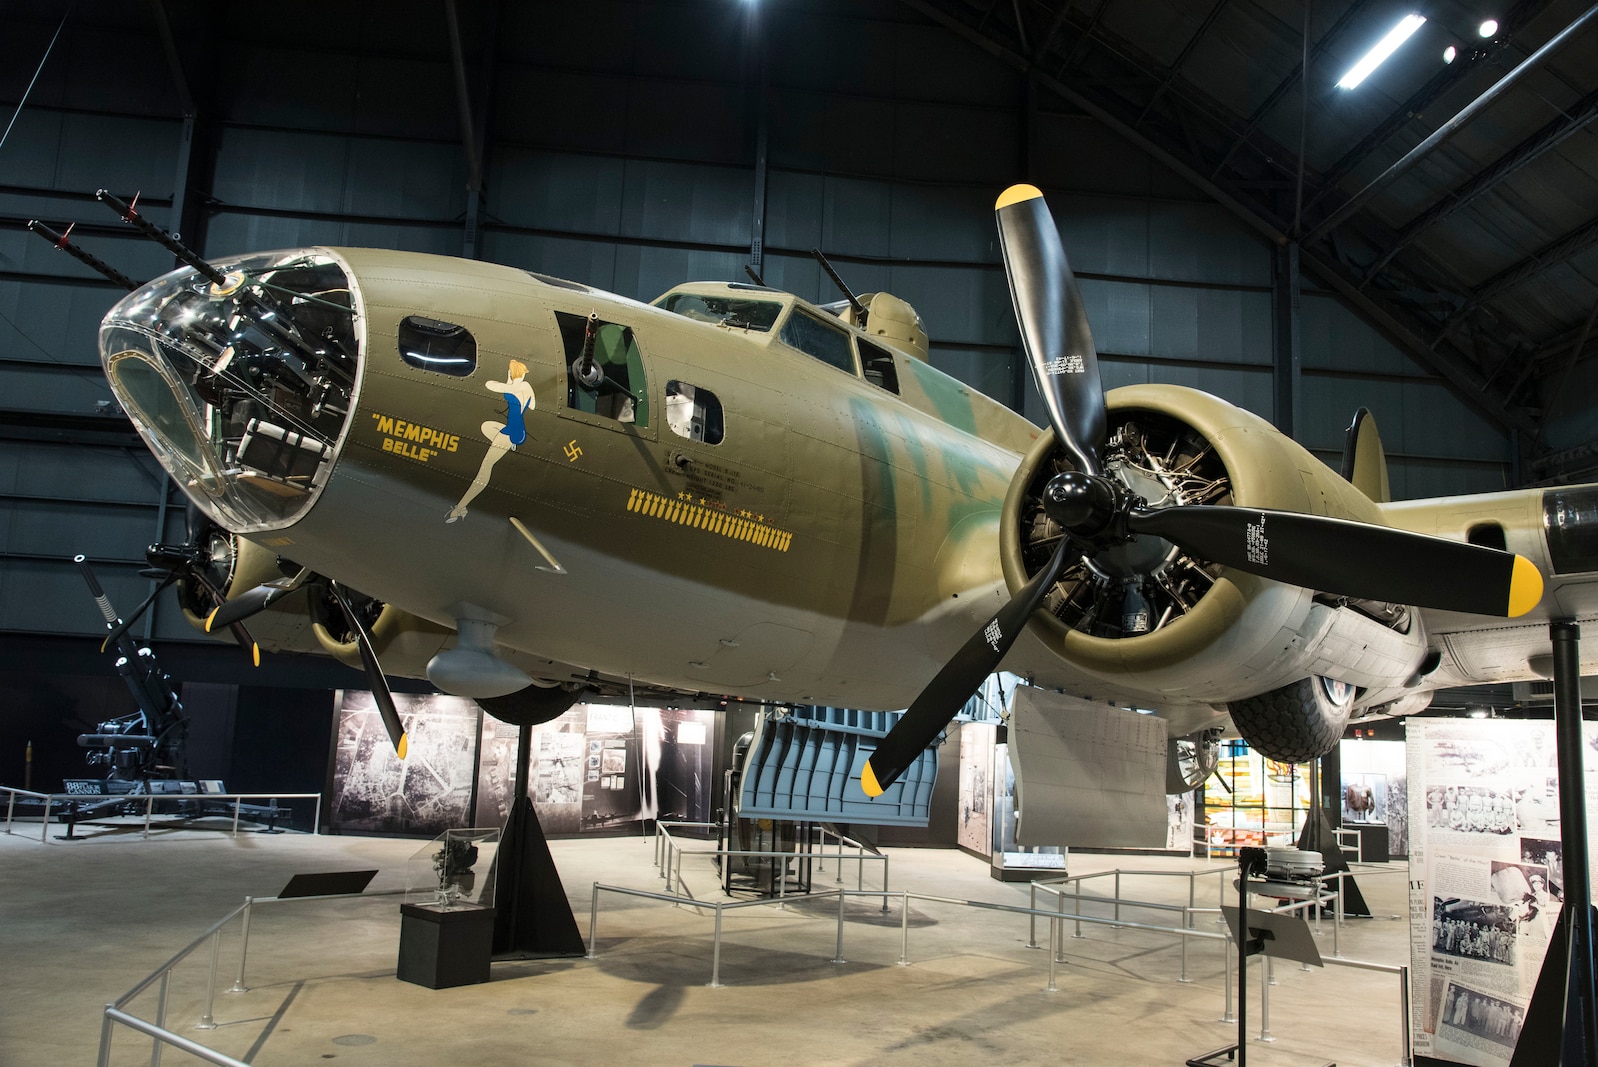 Boeing B-17F Memphis Belle on display in the WWII Gallery at the National Museum of the United States Air Force. B-17's  flew in every combat zone during World War II, but its most significant service was over Europe. Along with the B-24 Liberator, the B-17 formed the backbone of the USAAF strategic bombing force, and it helped win the war by crippling Germany’s war industry.  (U.S. Air Force photo by Ken LaRock)